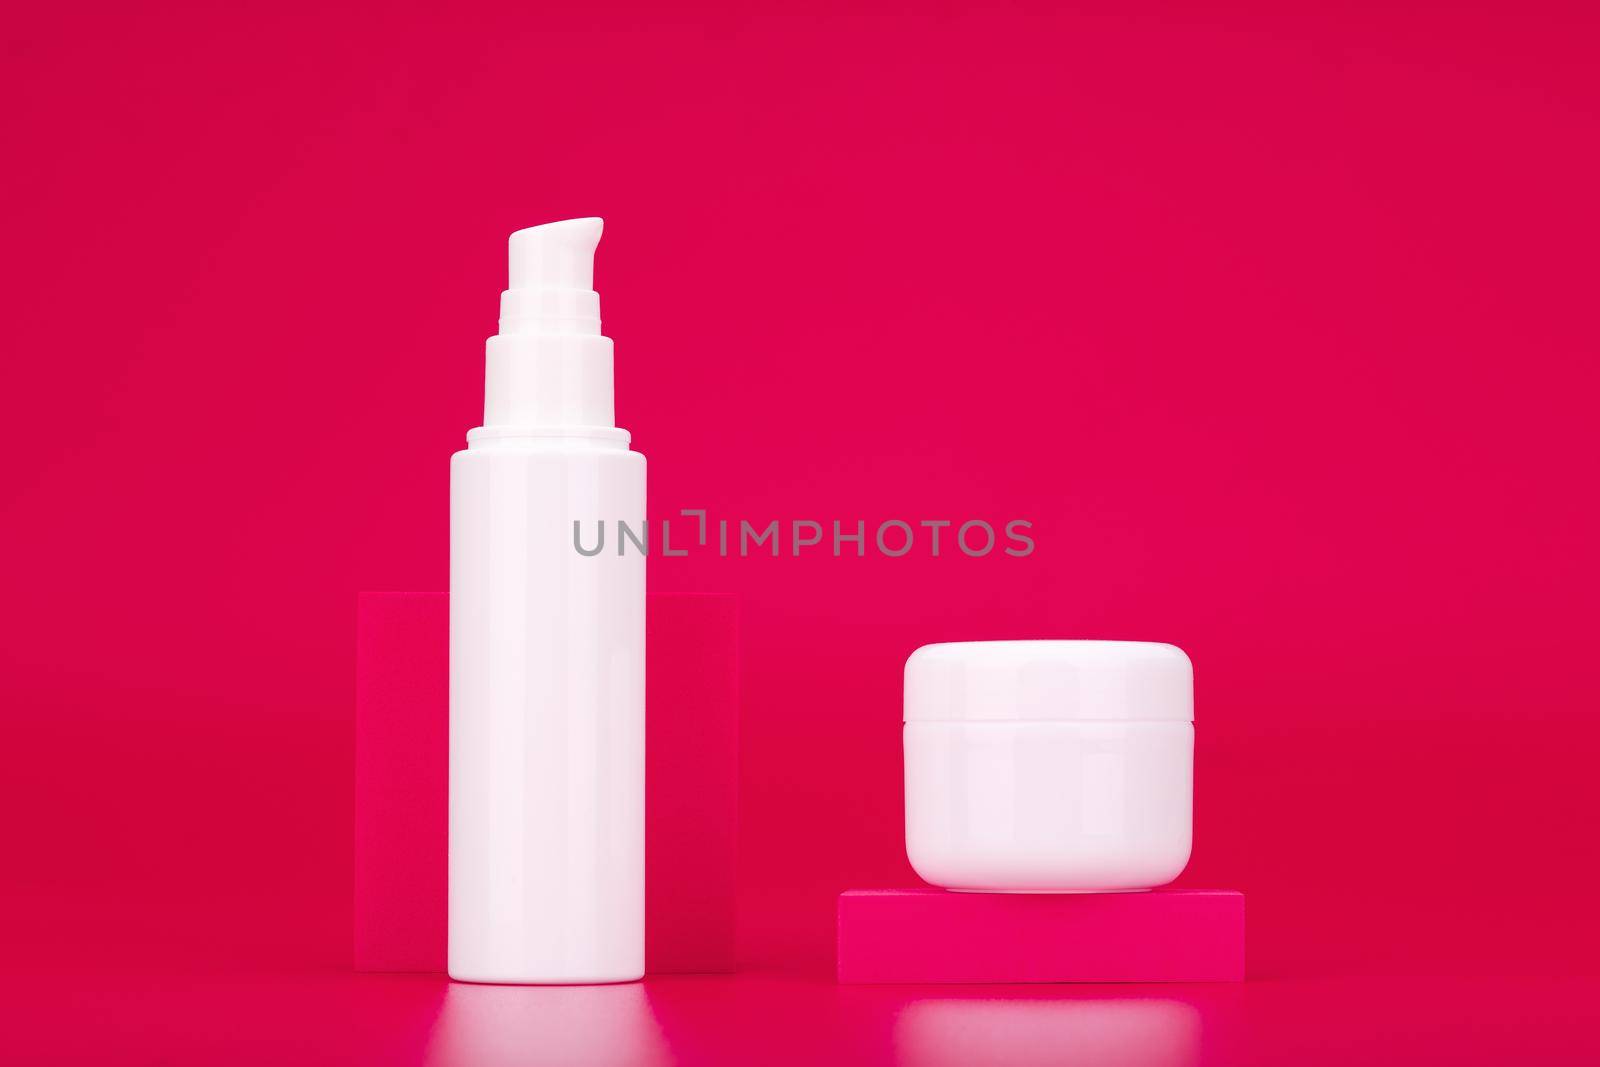 Cosmetic set with face cream or gel and under eye serum or cream against pink background. Concept of daily skin care routine or anti aging skin treatment